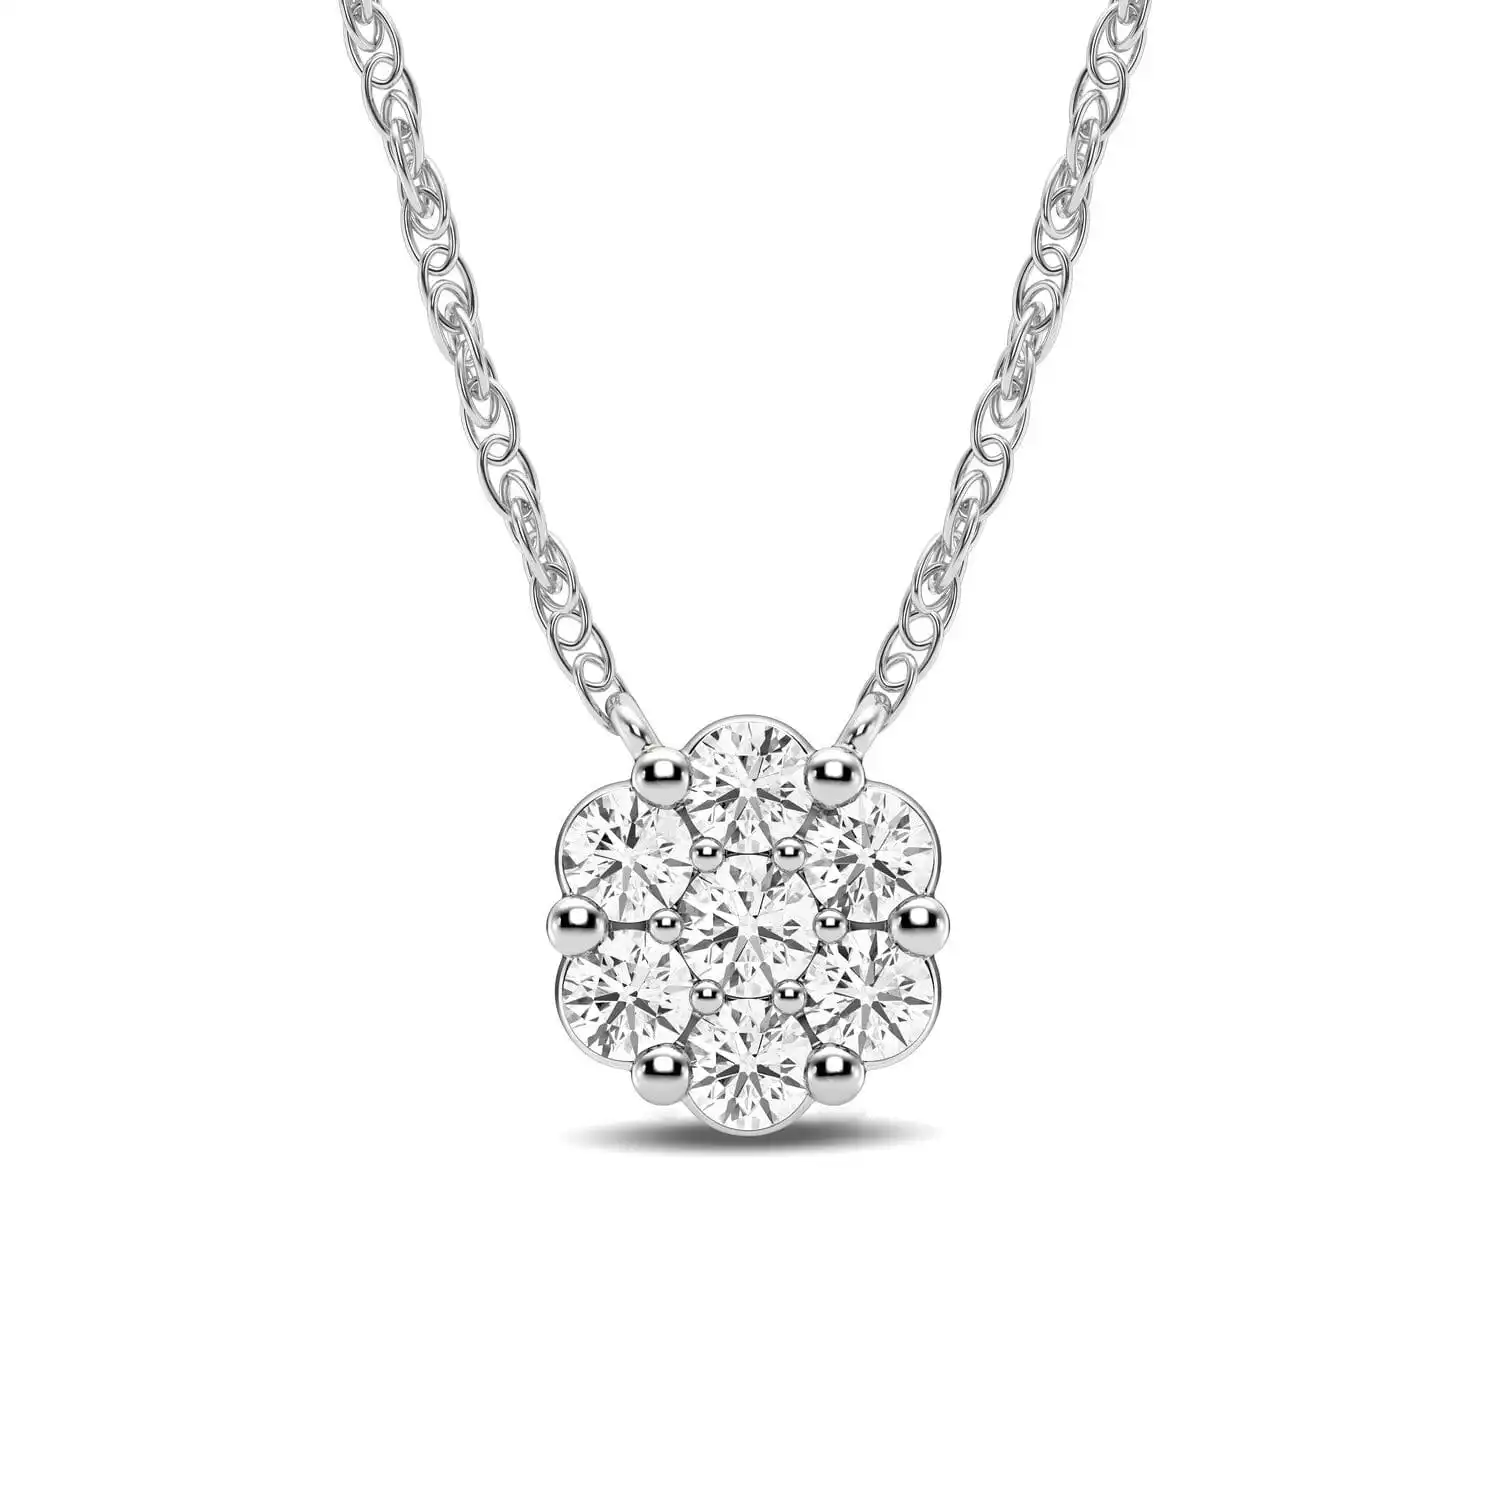 Meera Flower Necklace with 1/5ct of Laboratory Grown Diamonds in 9ct White Gold